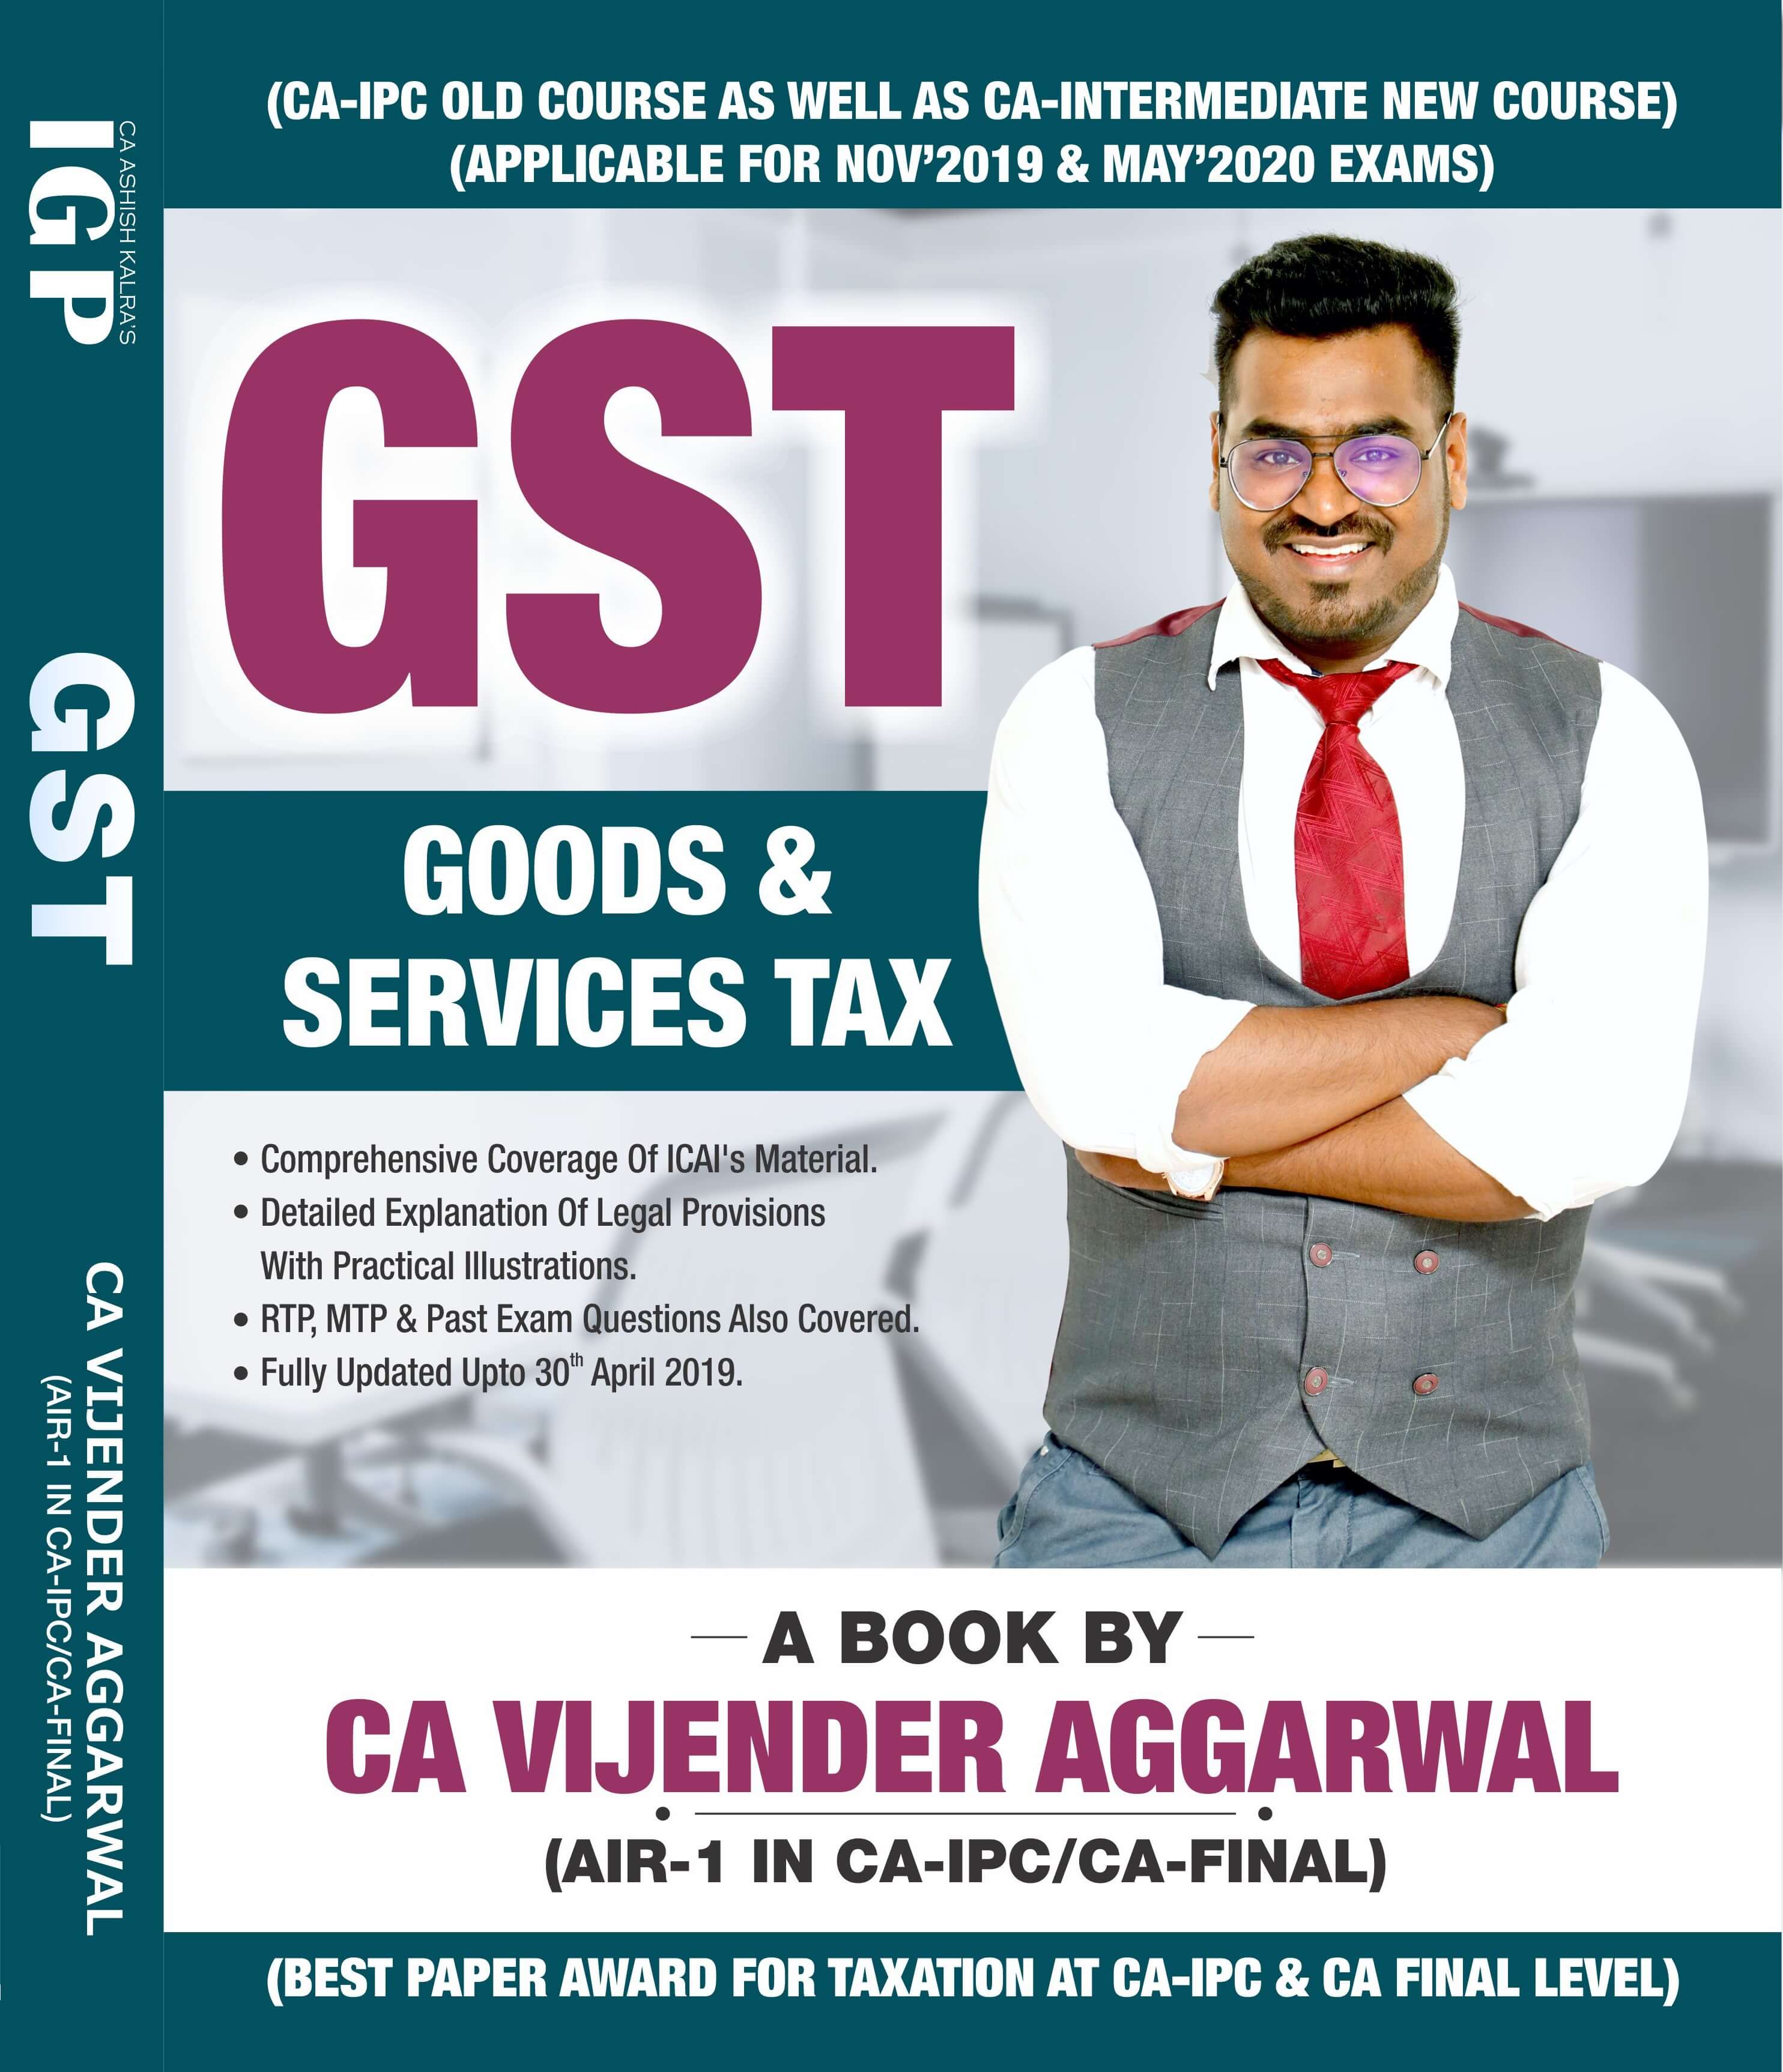 Ca vijender aggarwal taxation for May 2020 & Nov. 2020(income tax and GST ) set of 3 Book for ca inter